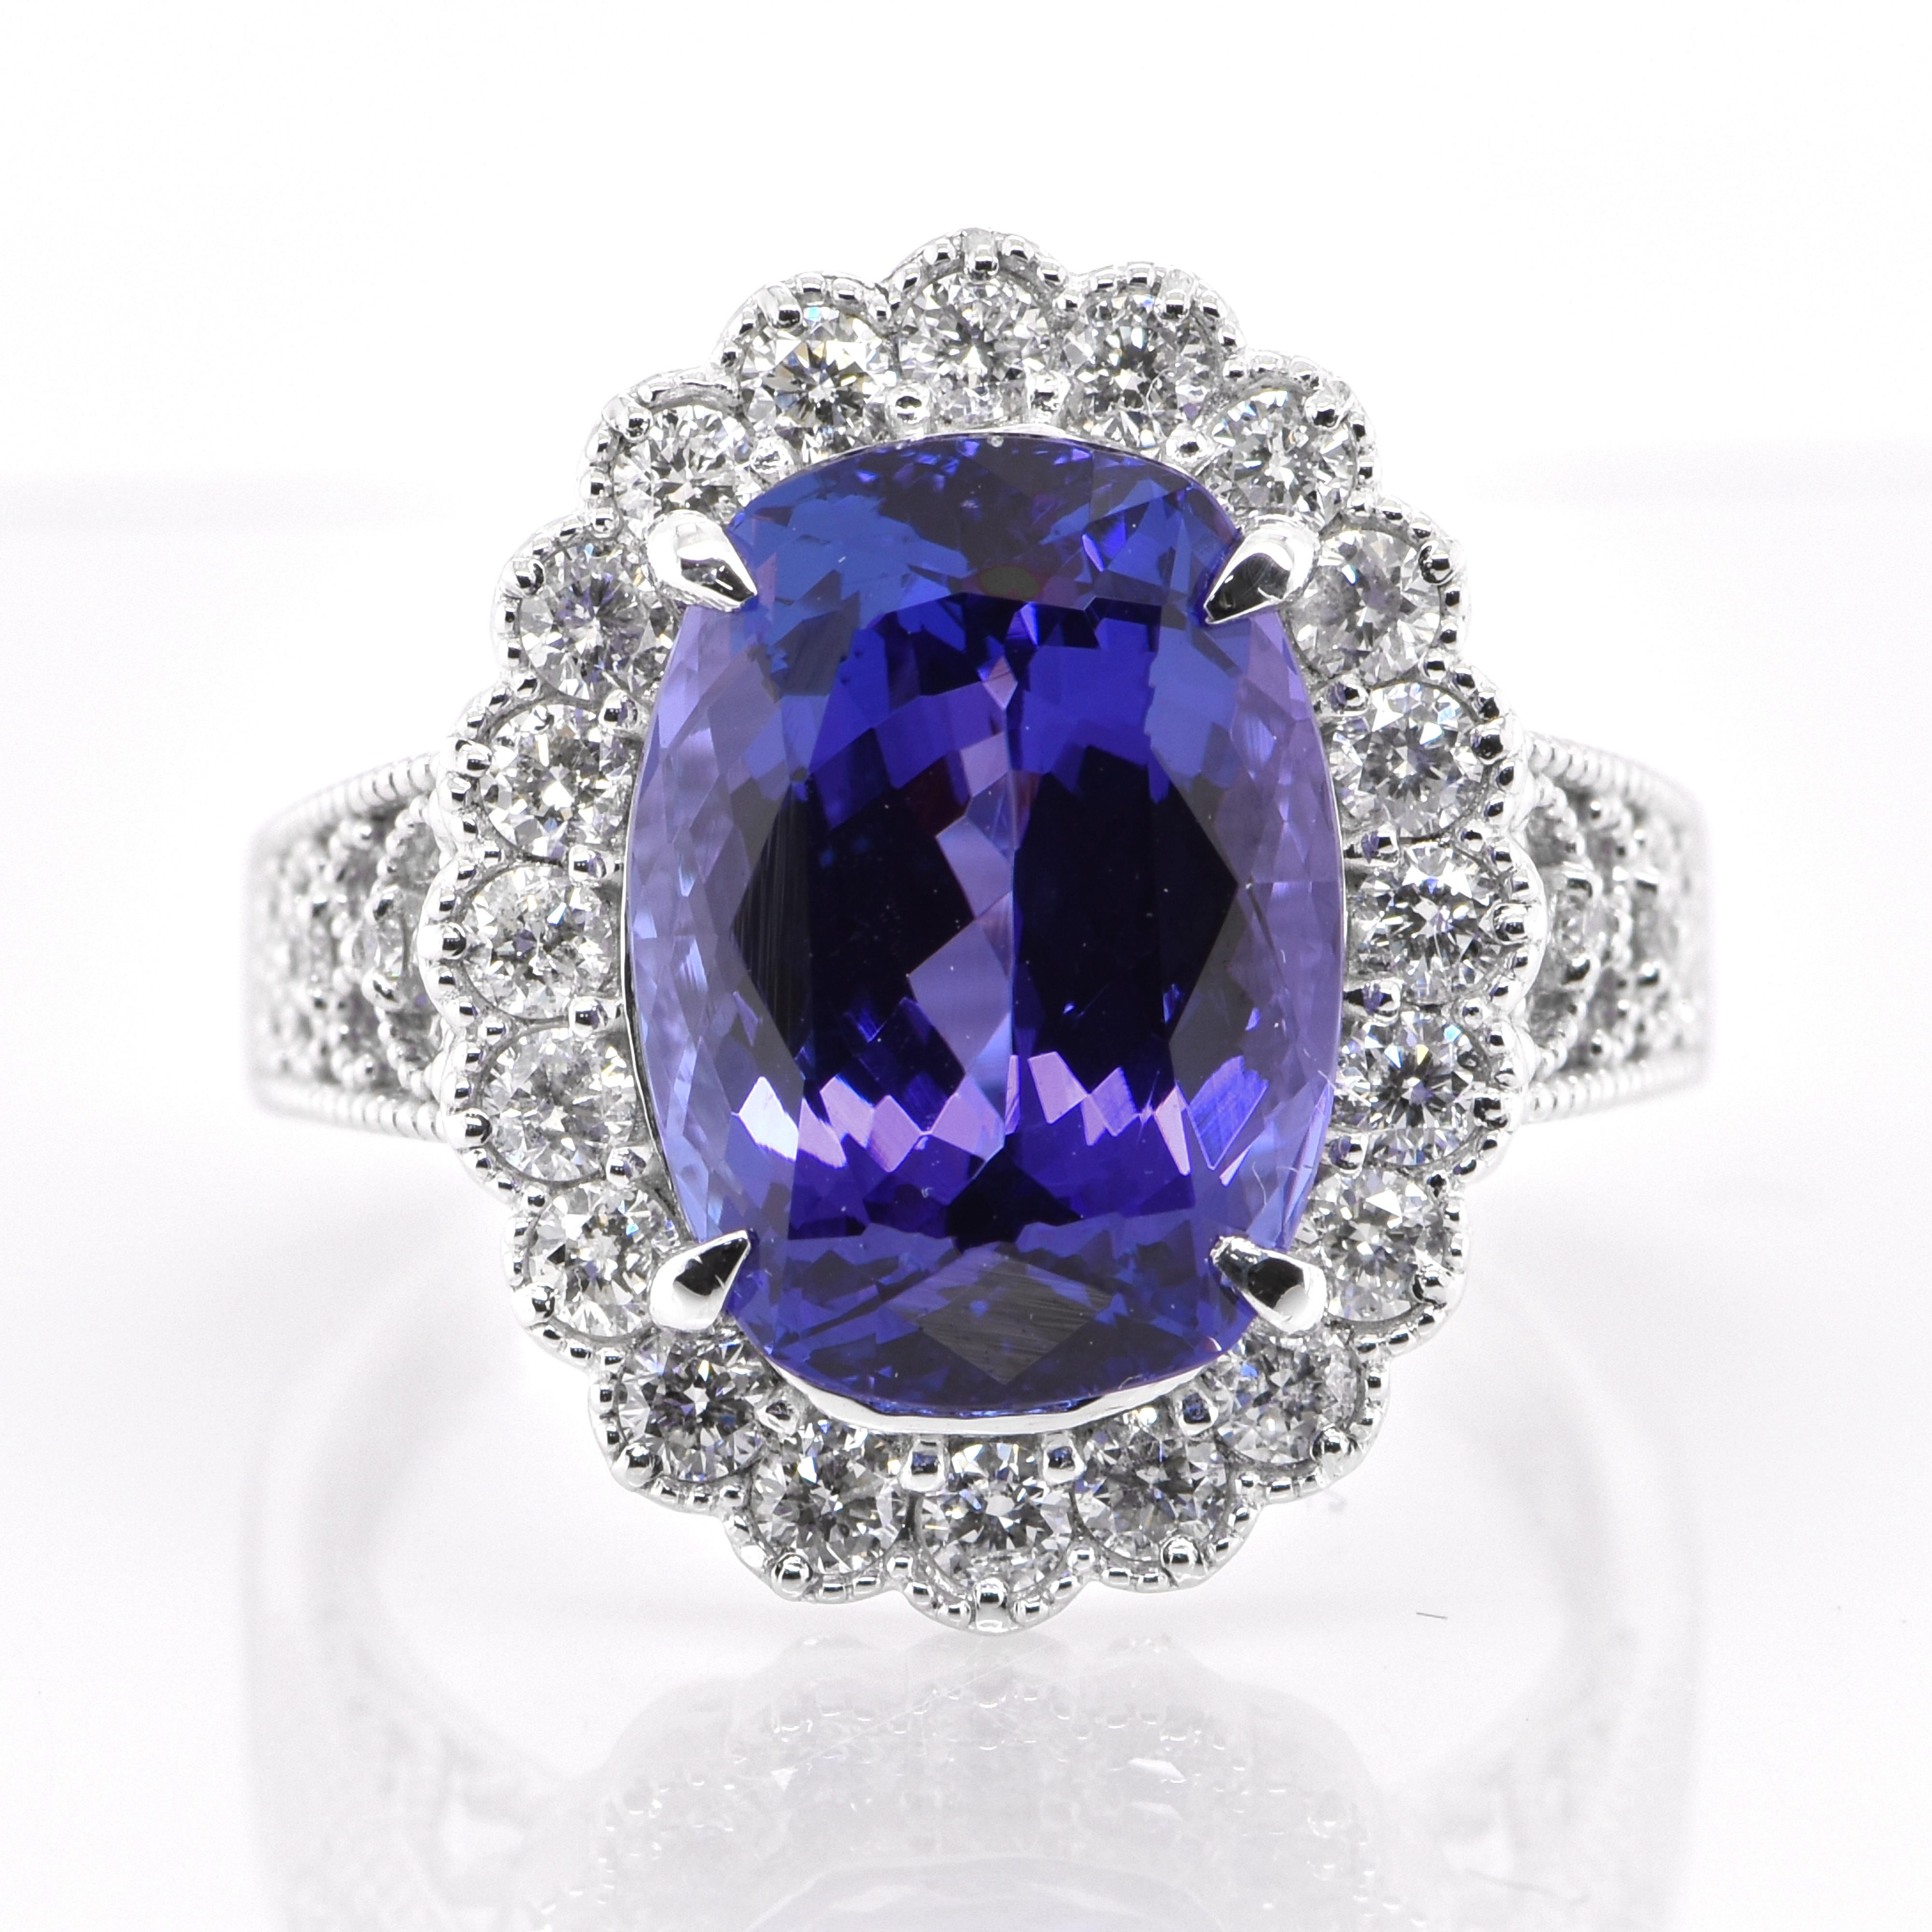 A beautiful Cocktail Ring featuring a 6.96 Carat Natural Tanzanite and 0.71 Carats of Diamond Accents set in Platinum. Tanzanite's name was given by Tiffany and Co after its only known source: Tanzania. Tanzanite displays beautiful pleochroic colors